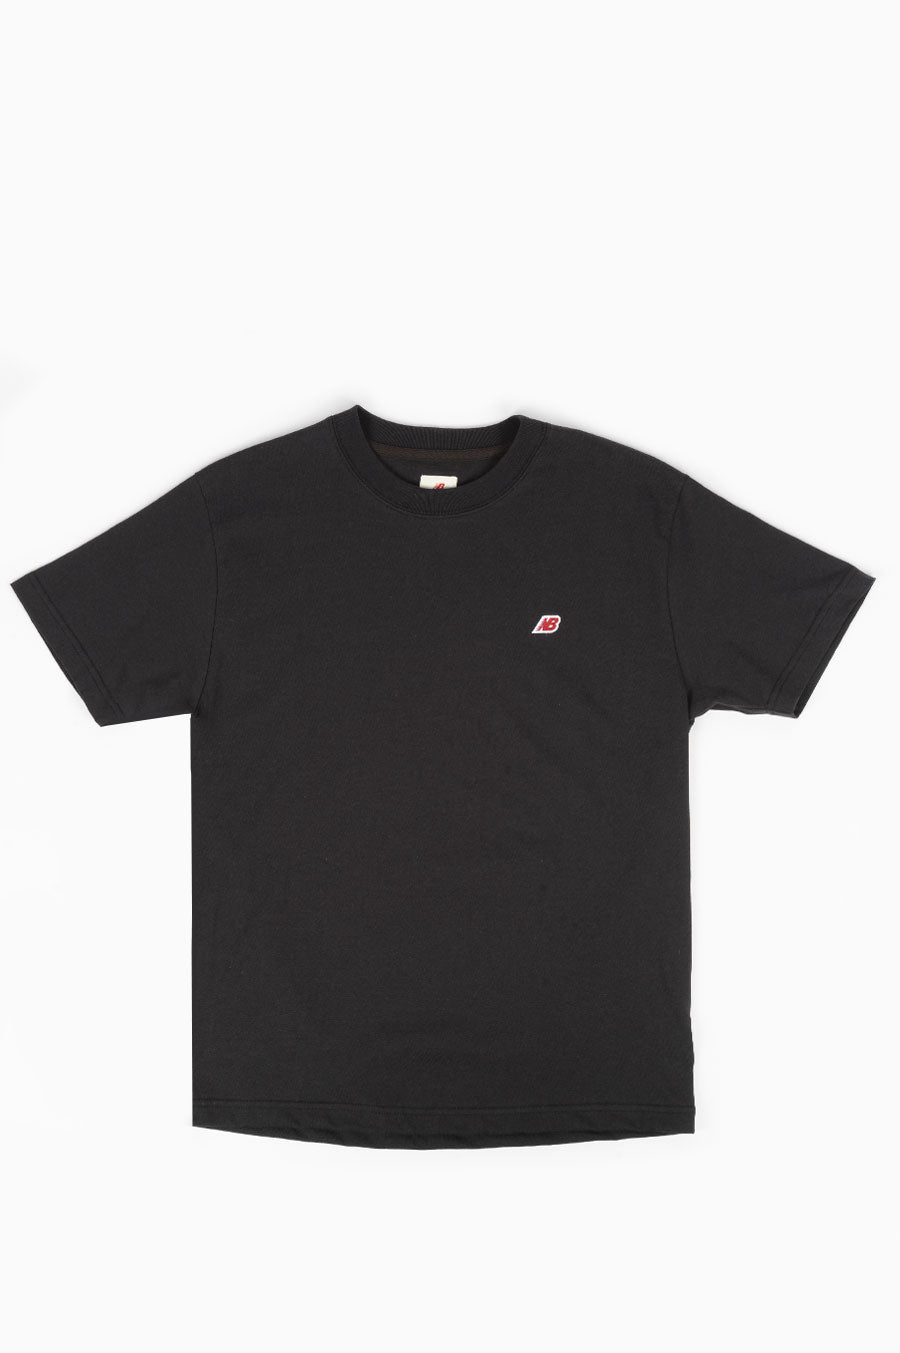 NEW BALANCE MADE IN – BLENDS TEE USA BLACK SS